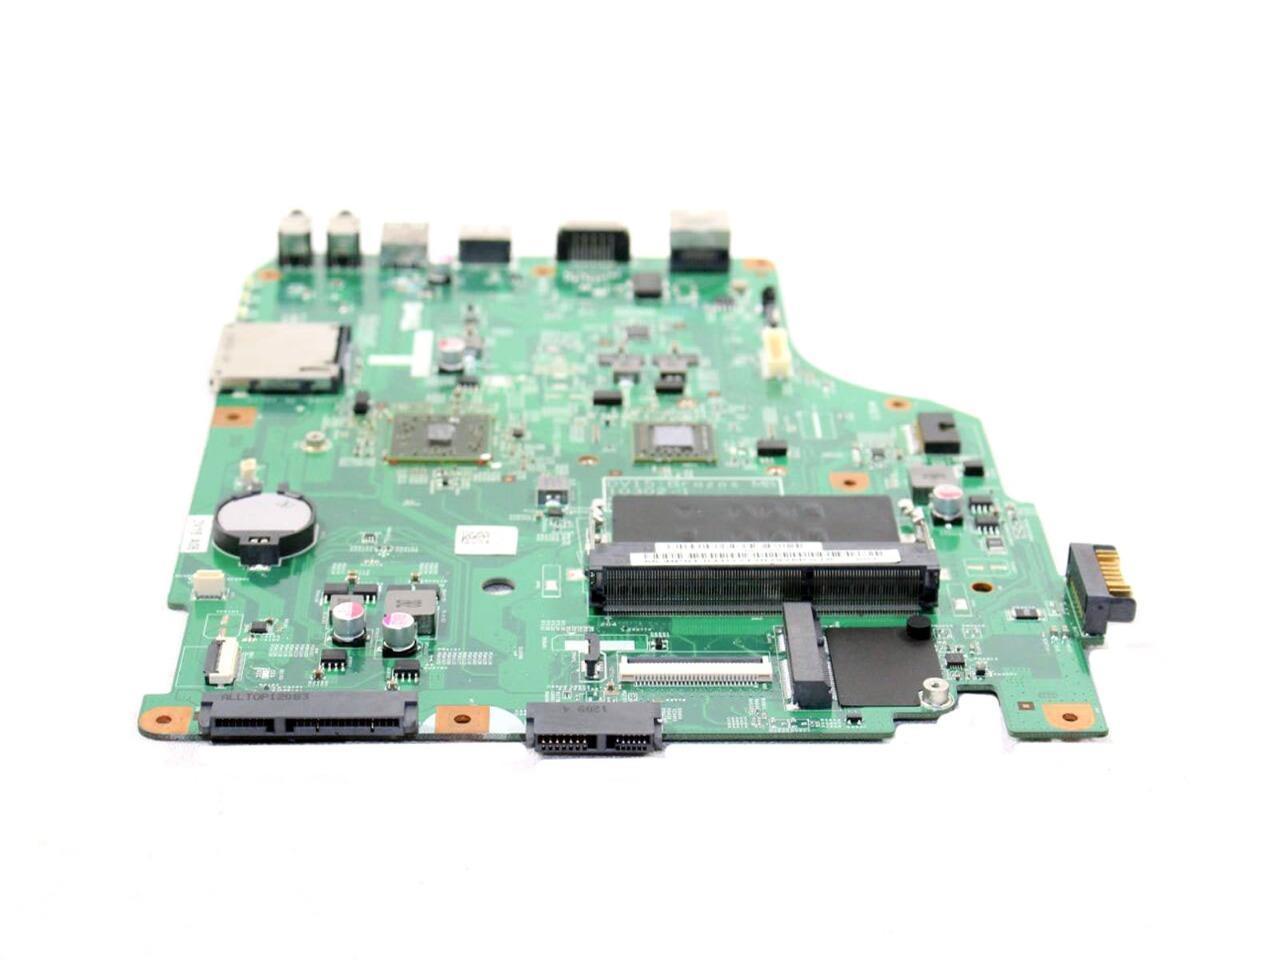 Dell Inspiron M5040 Motherboard System Board with AMD E-450 1.65GHz XP35R XP35R